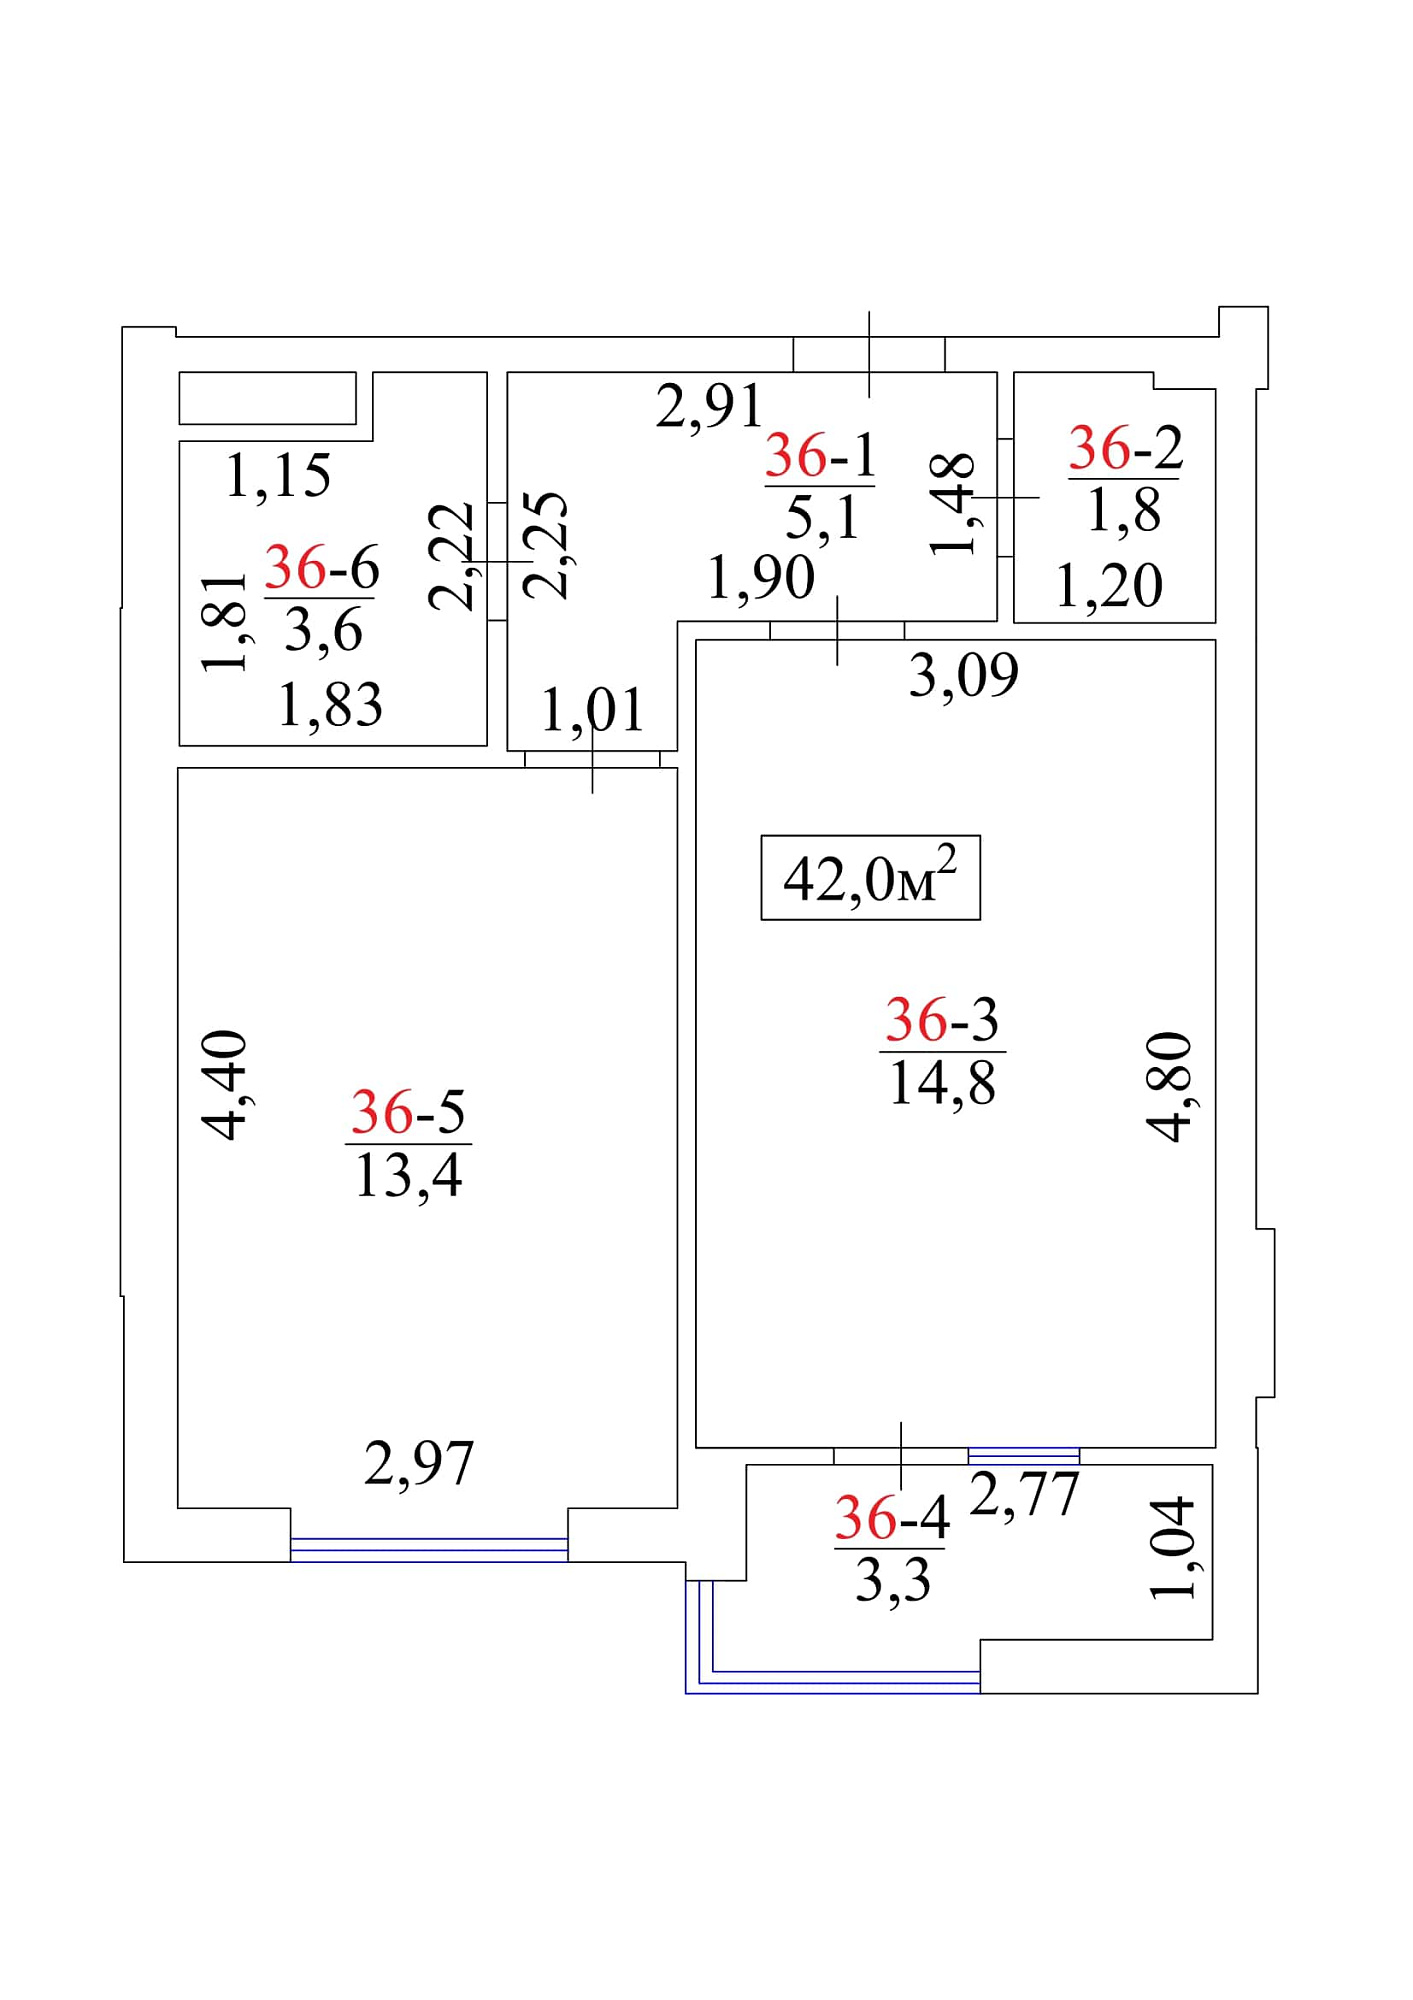 Planning 1-rm flats area 42m2, AB-01-04/00035.